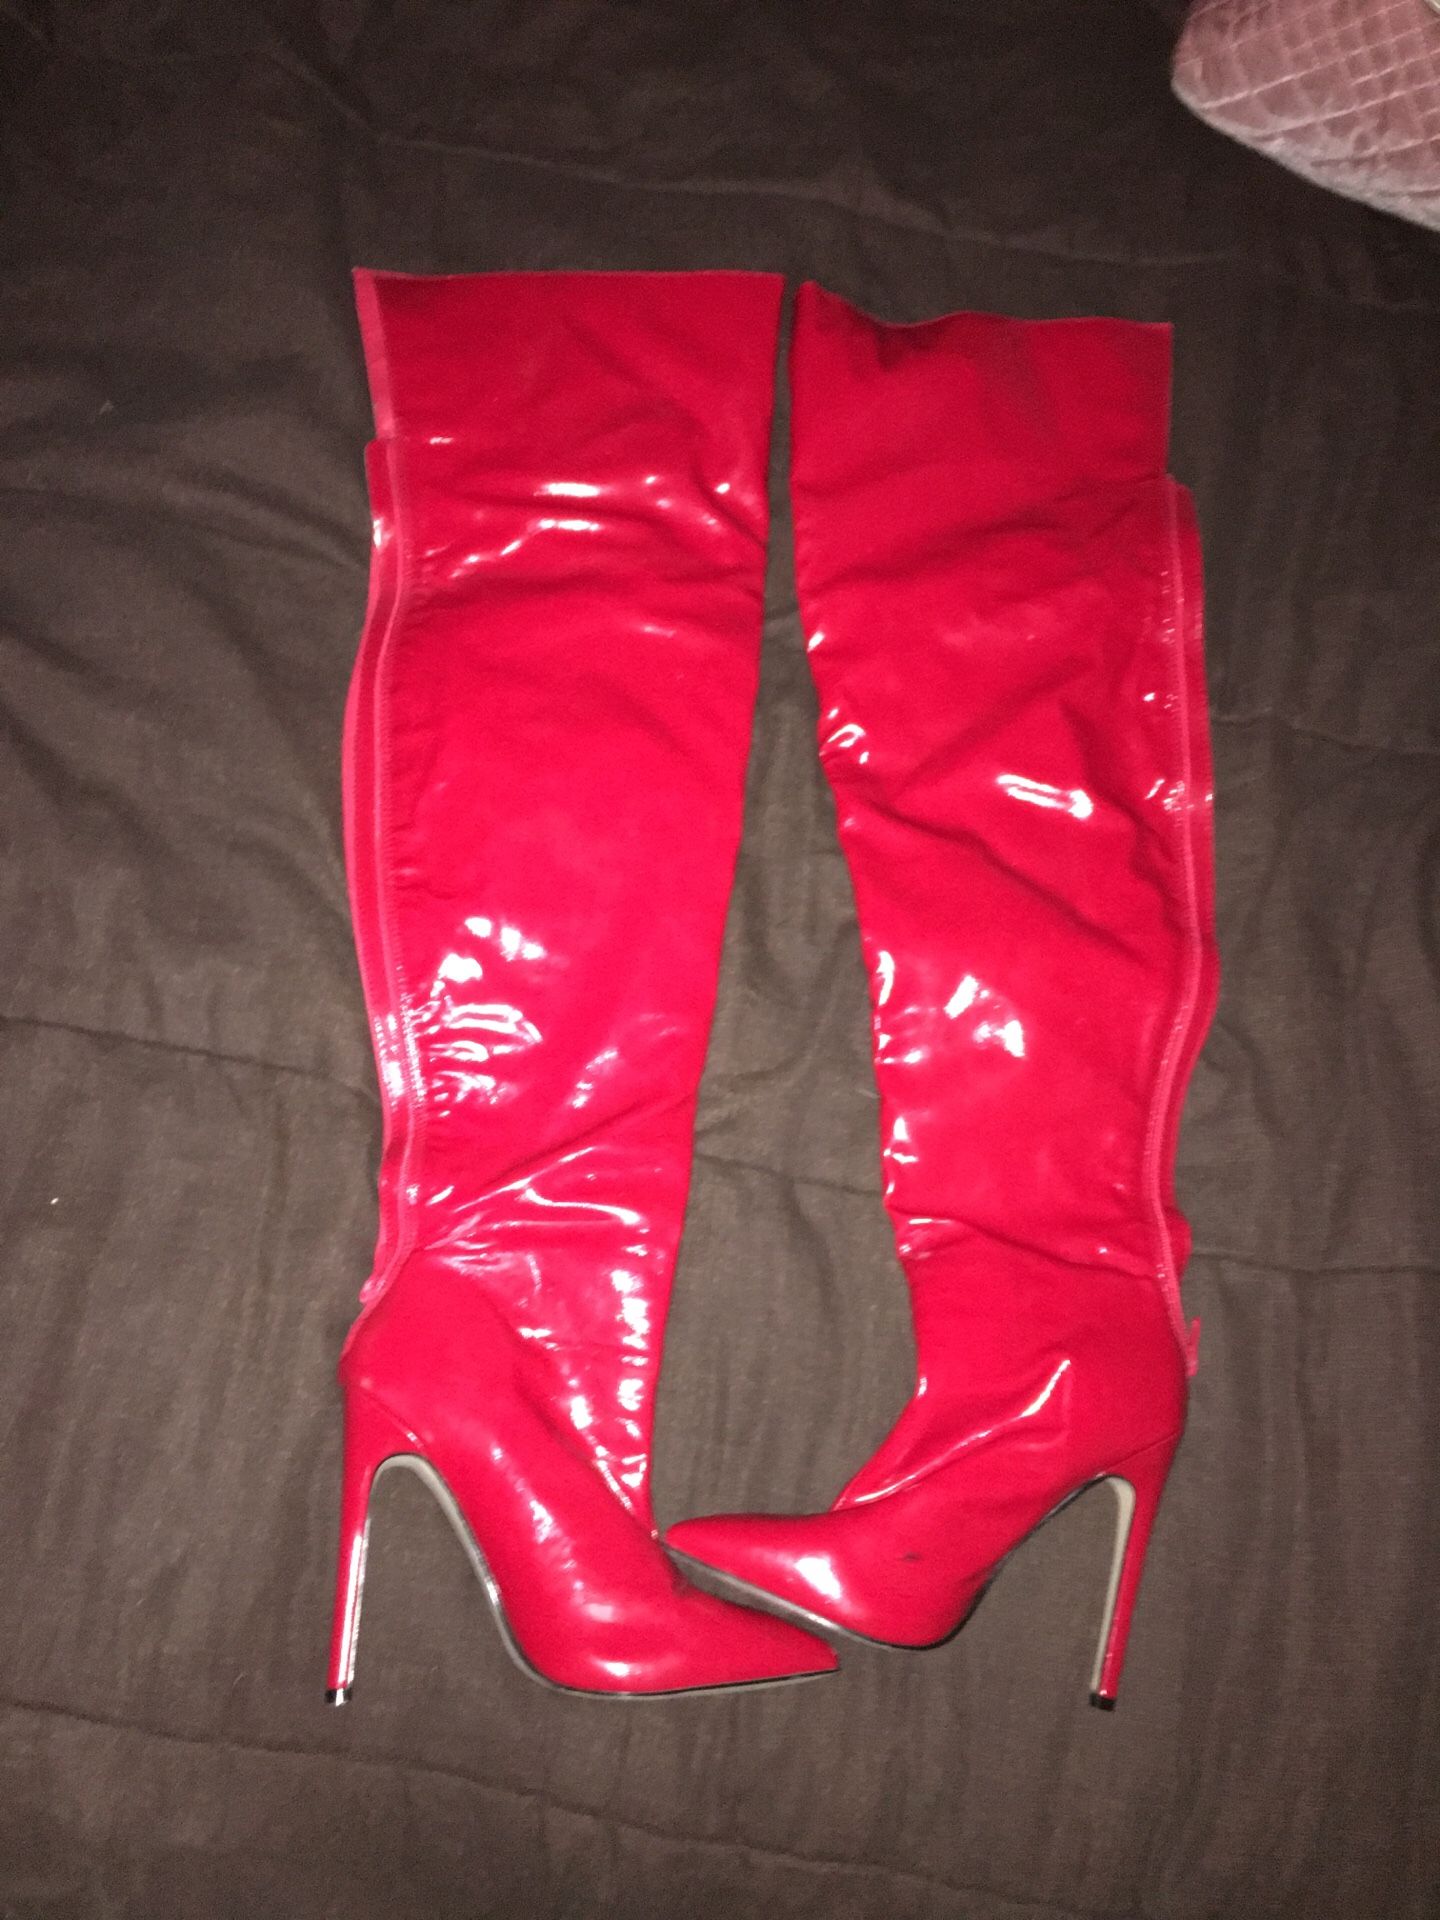 Thigh high red leather boots